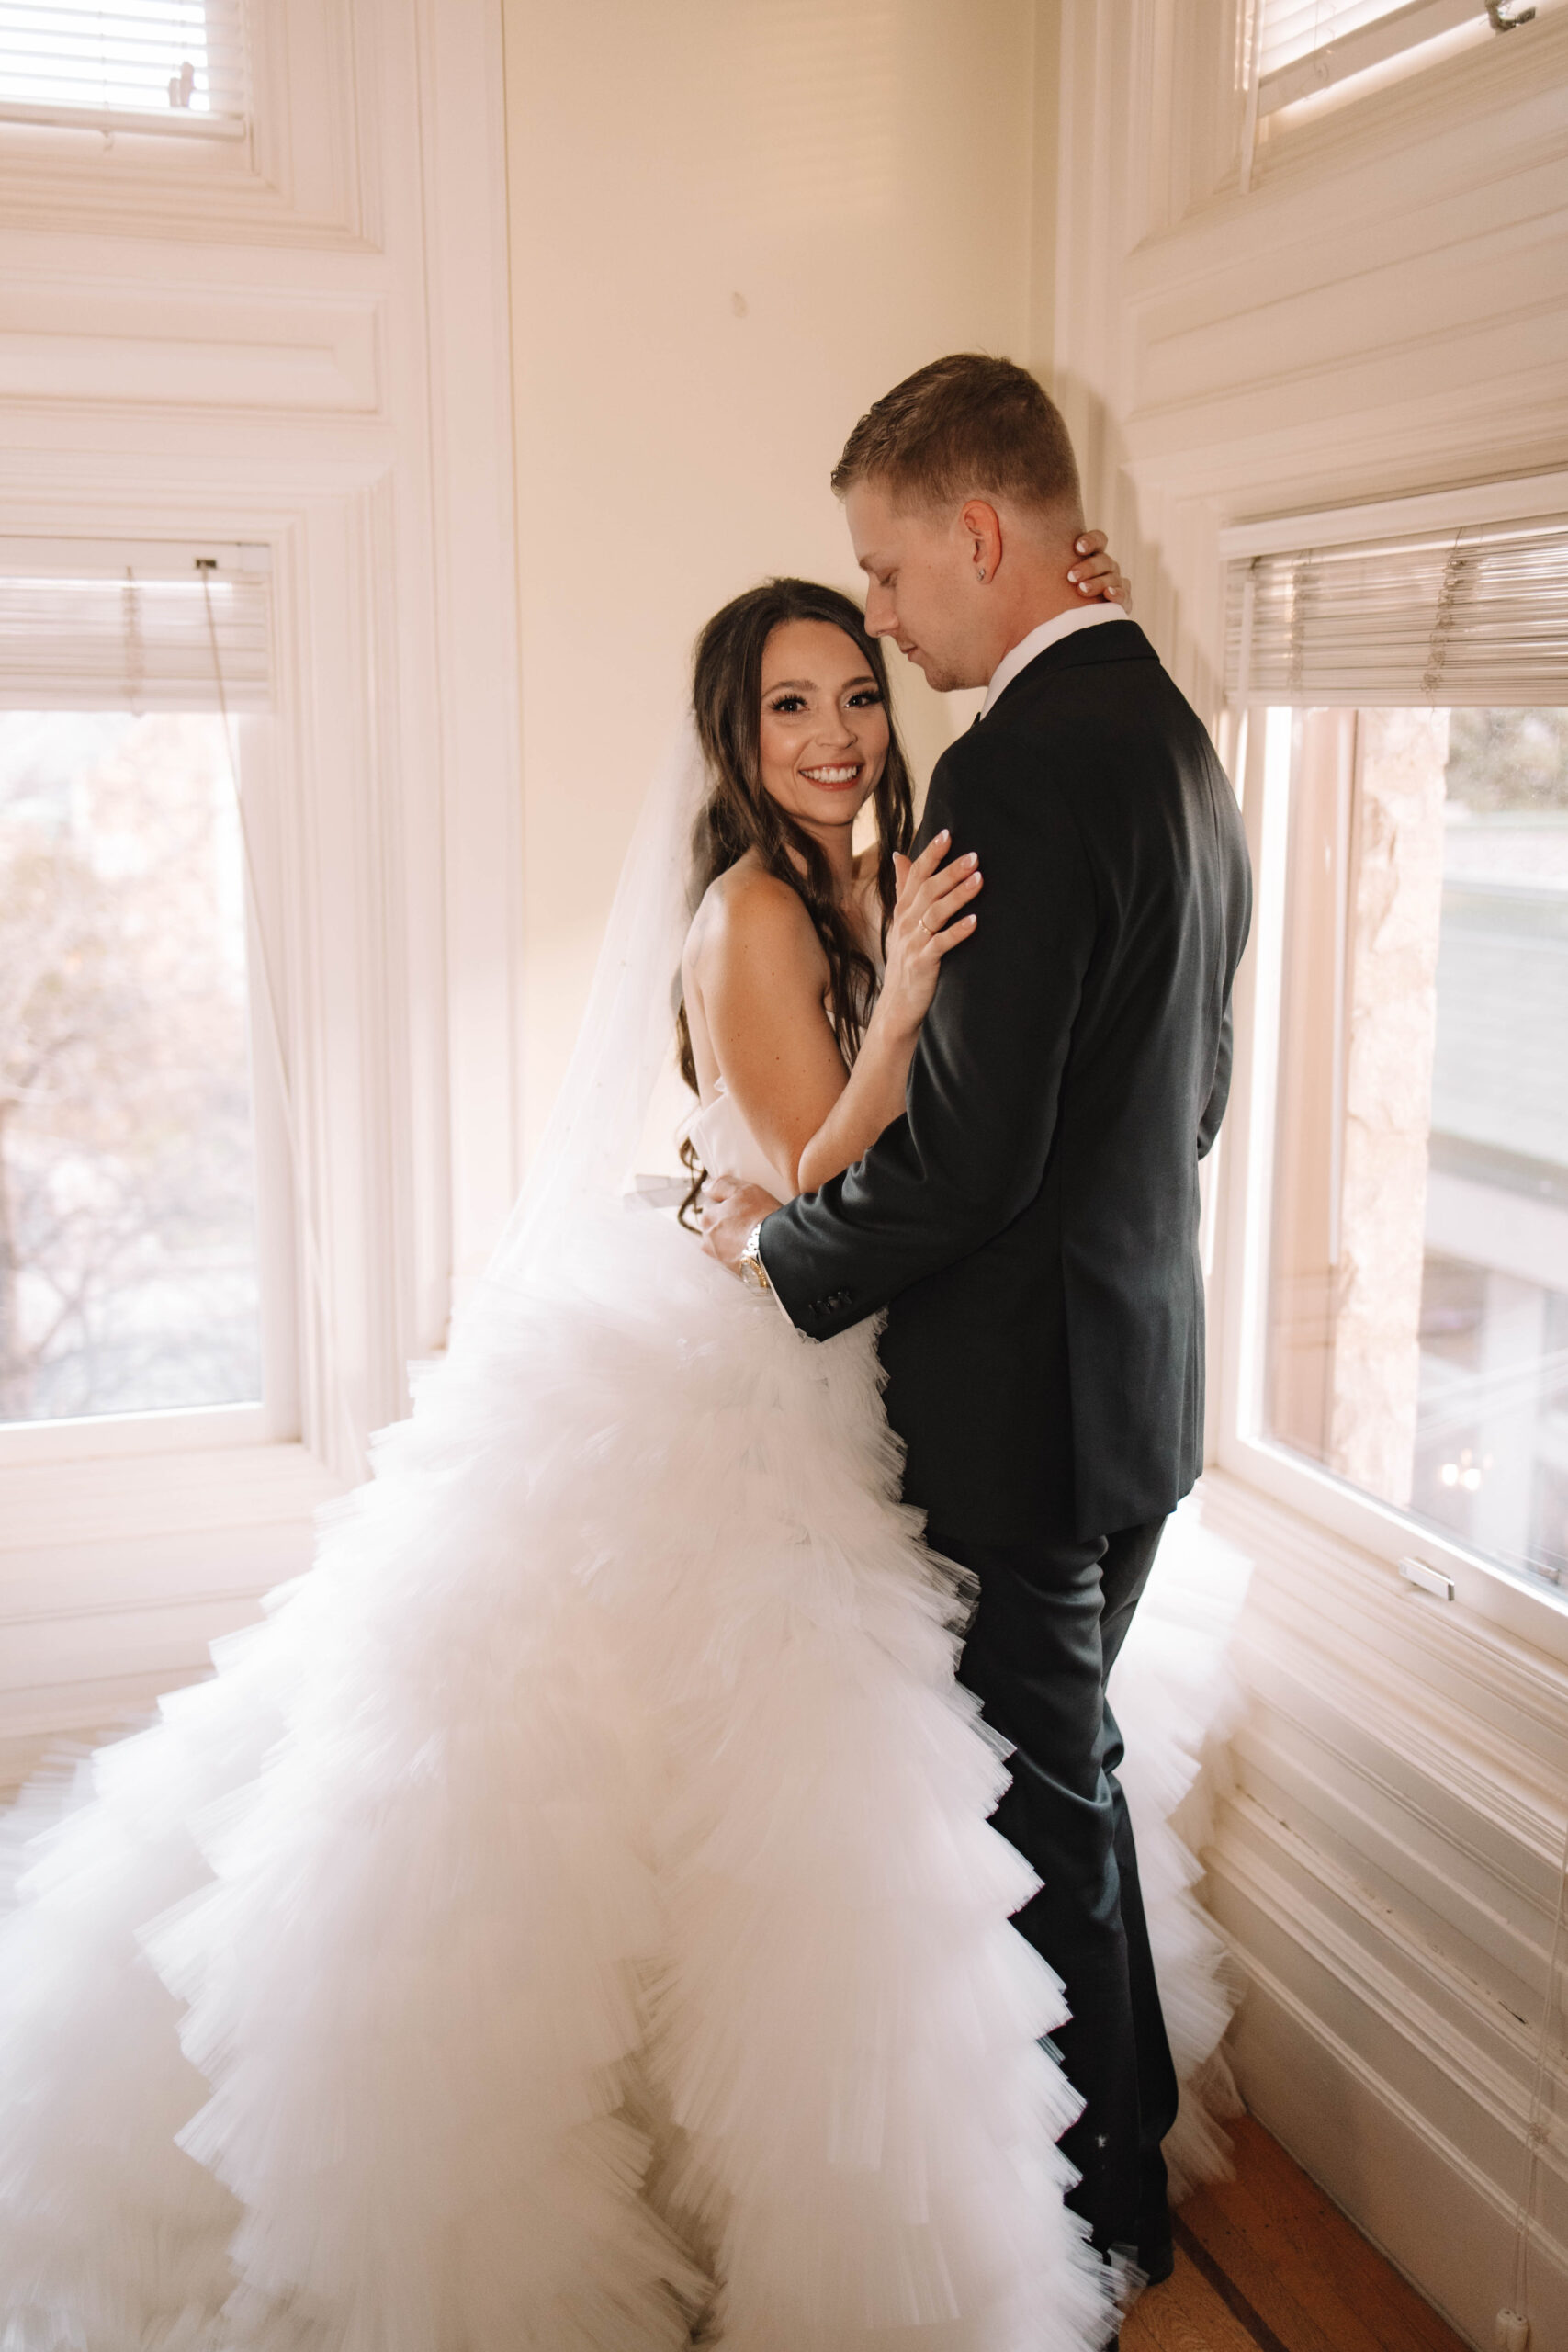 A bride in a white gown and a groom in a black suit share an intimate moment by a window in a softly lit room.